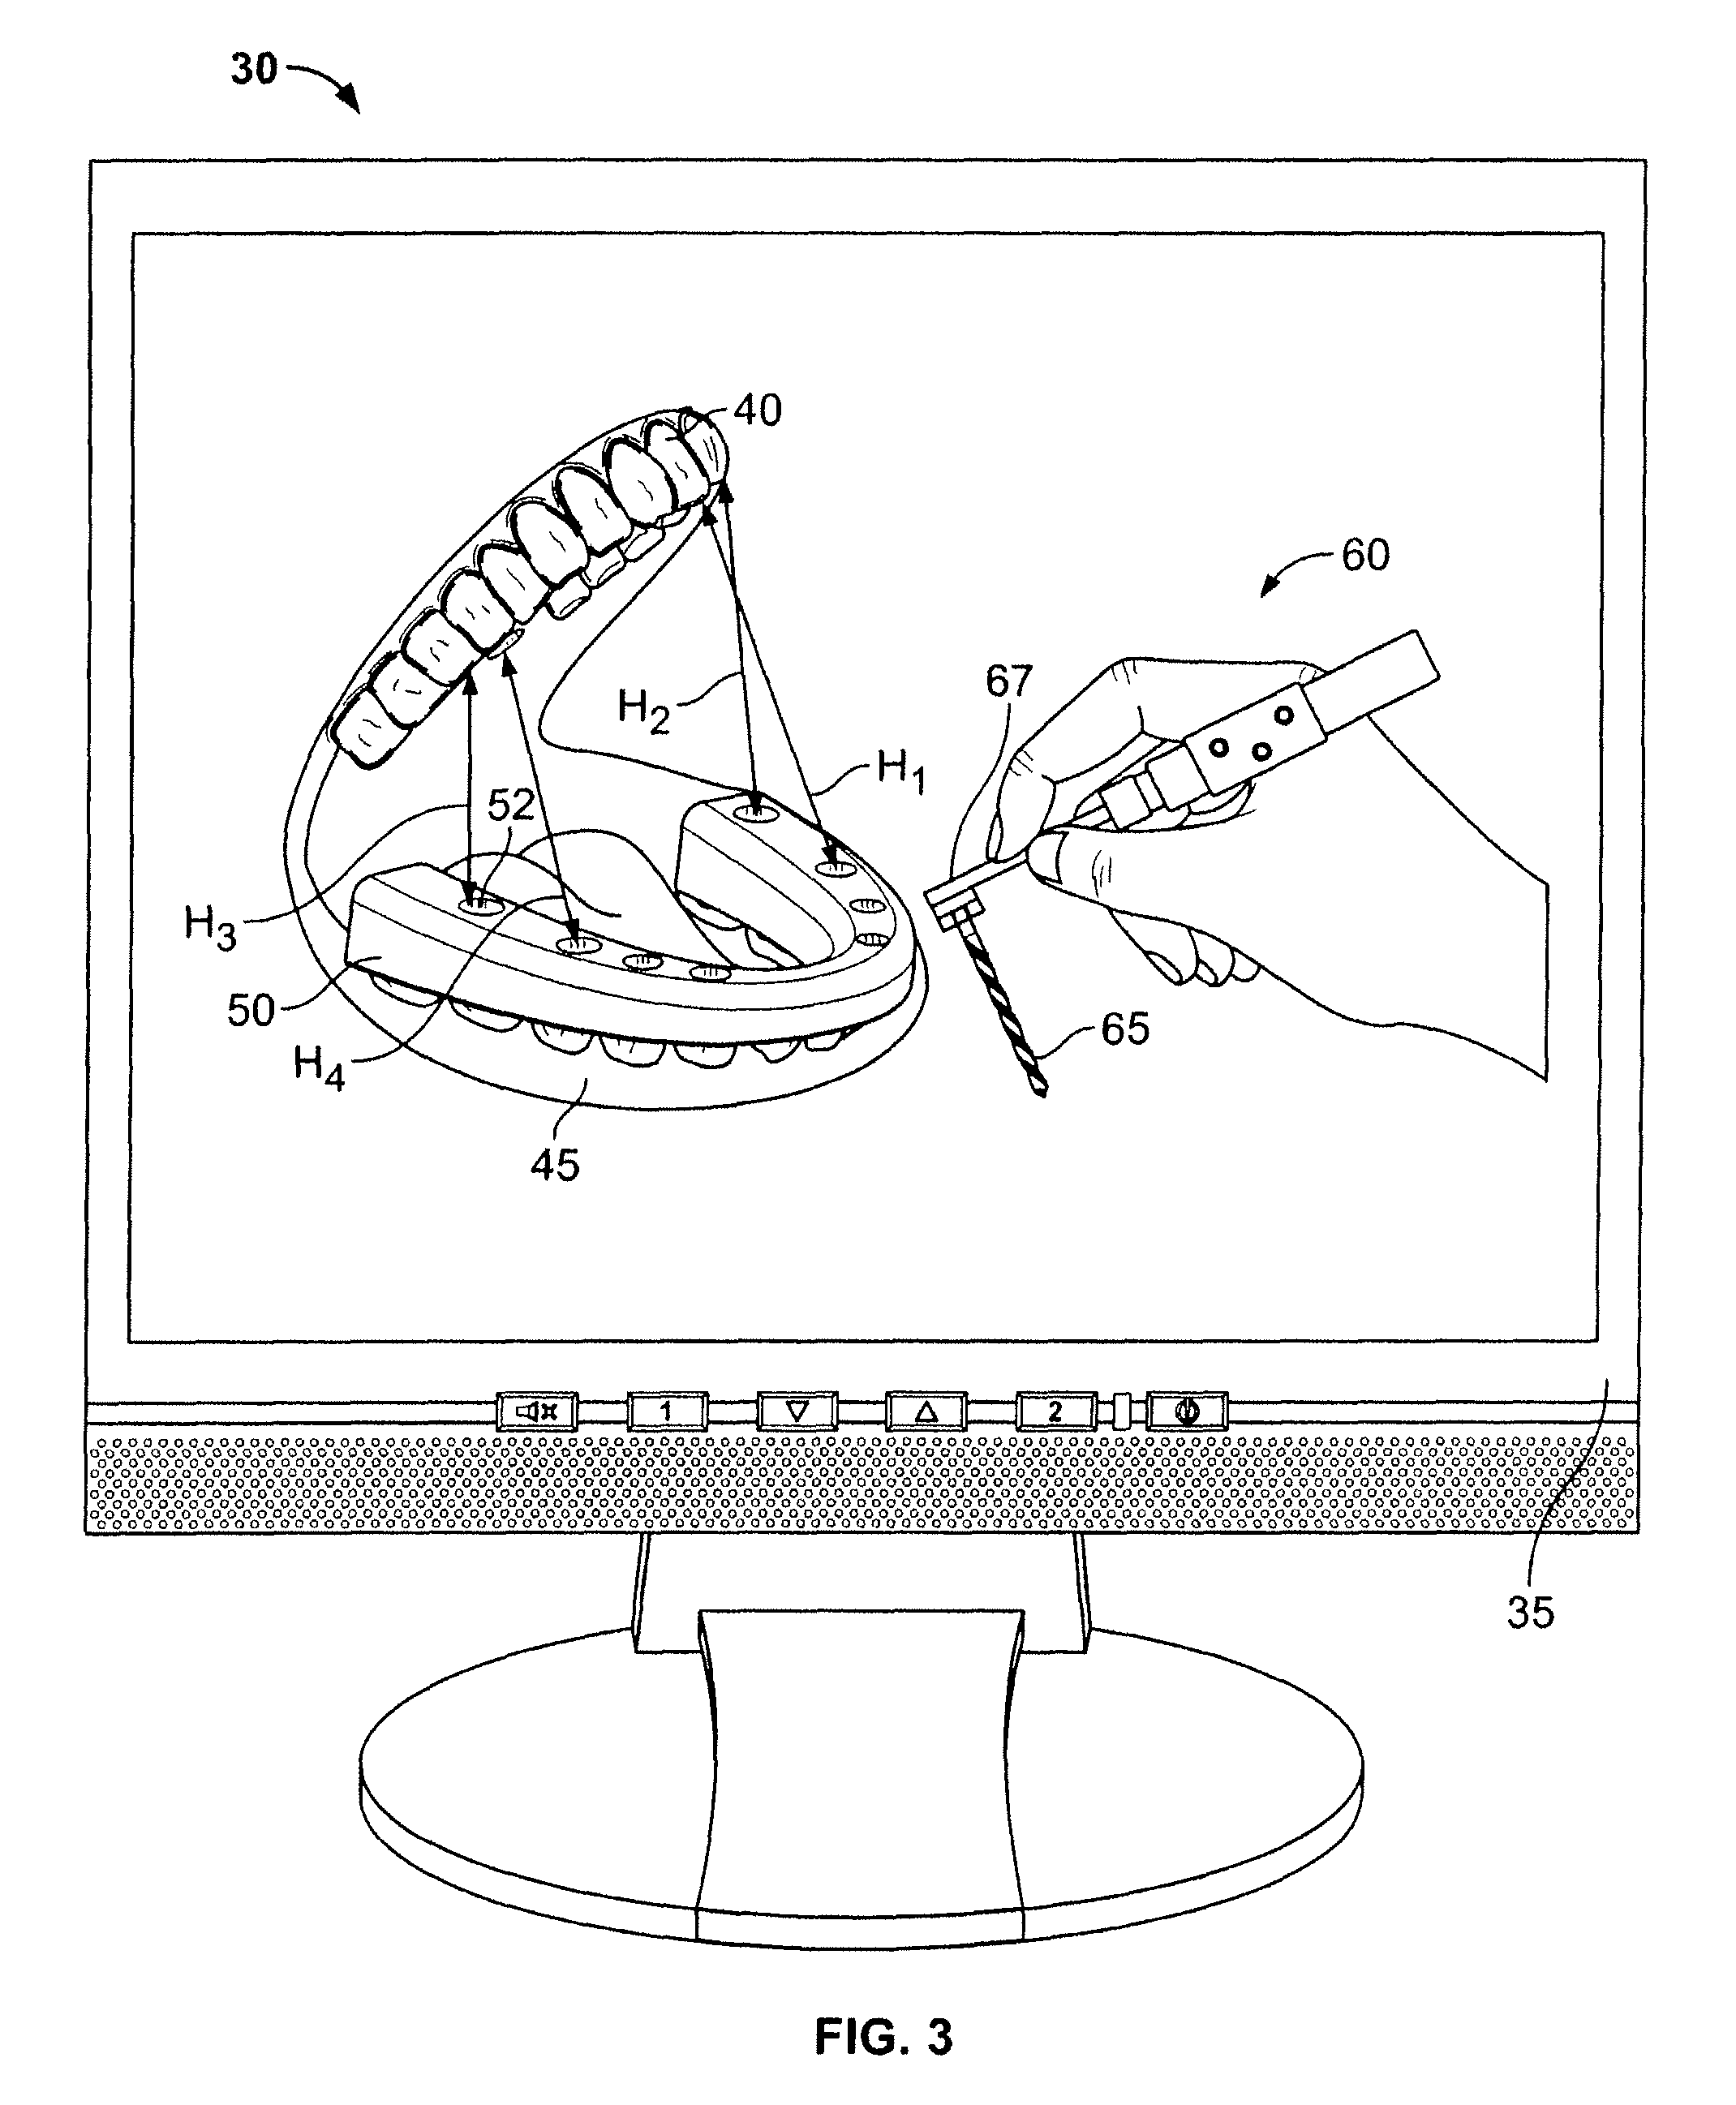 Method for pre-operative visualization of instrumentation used with a surgical guide for dental implant placement